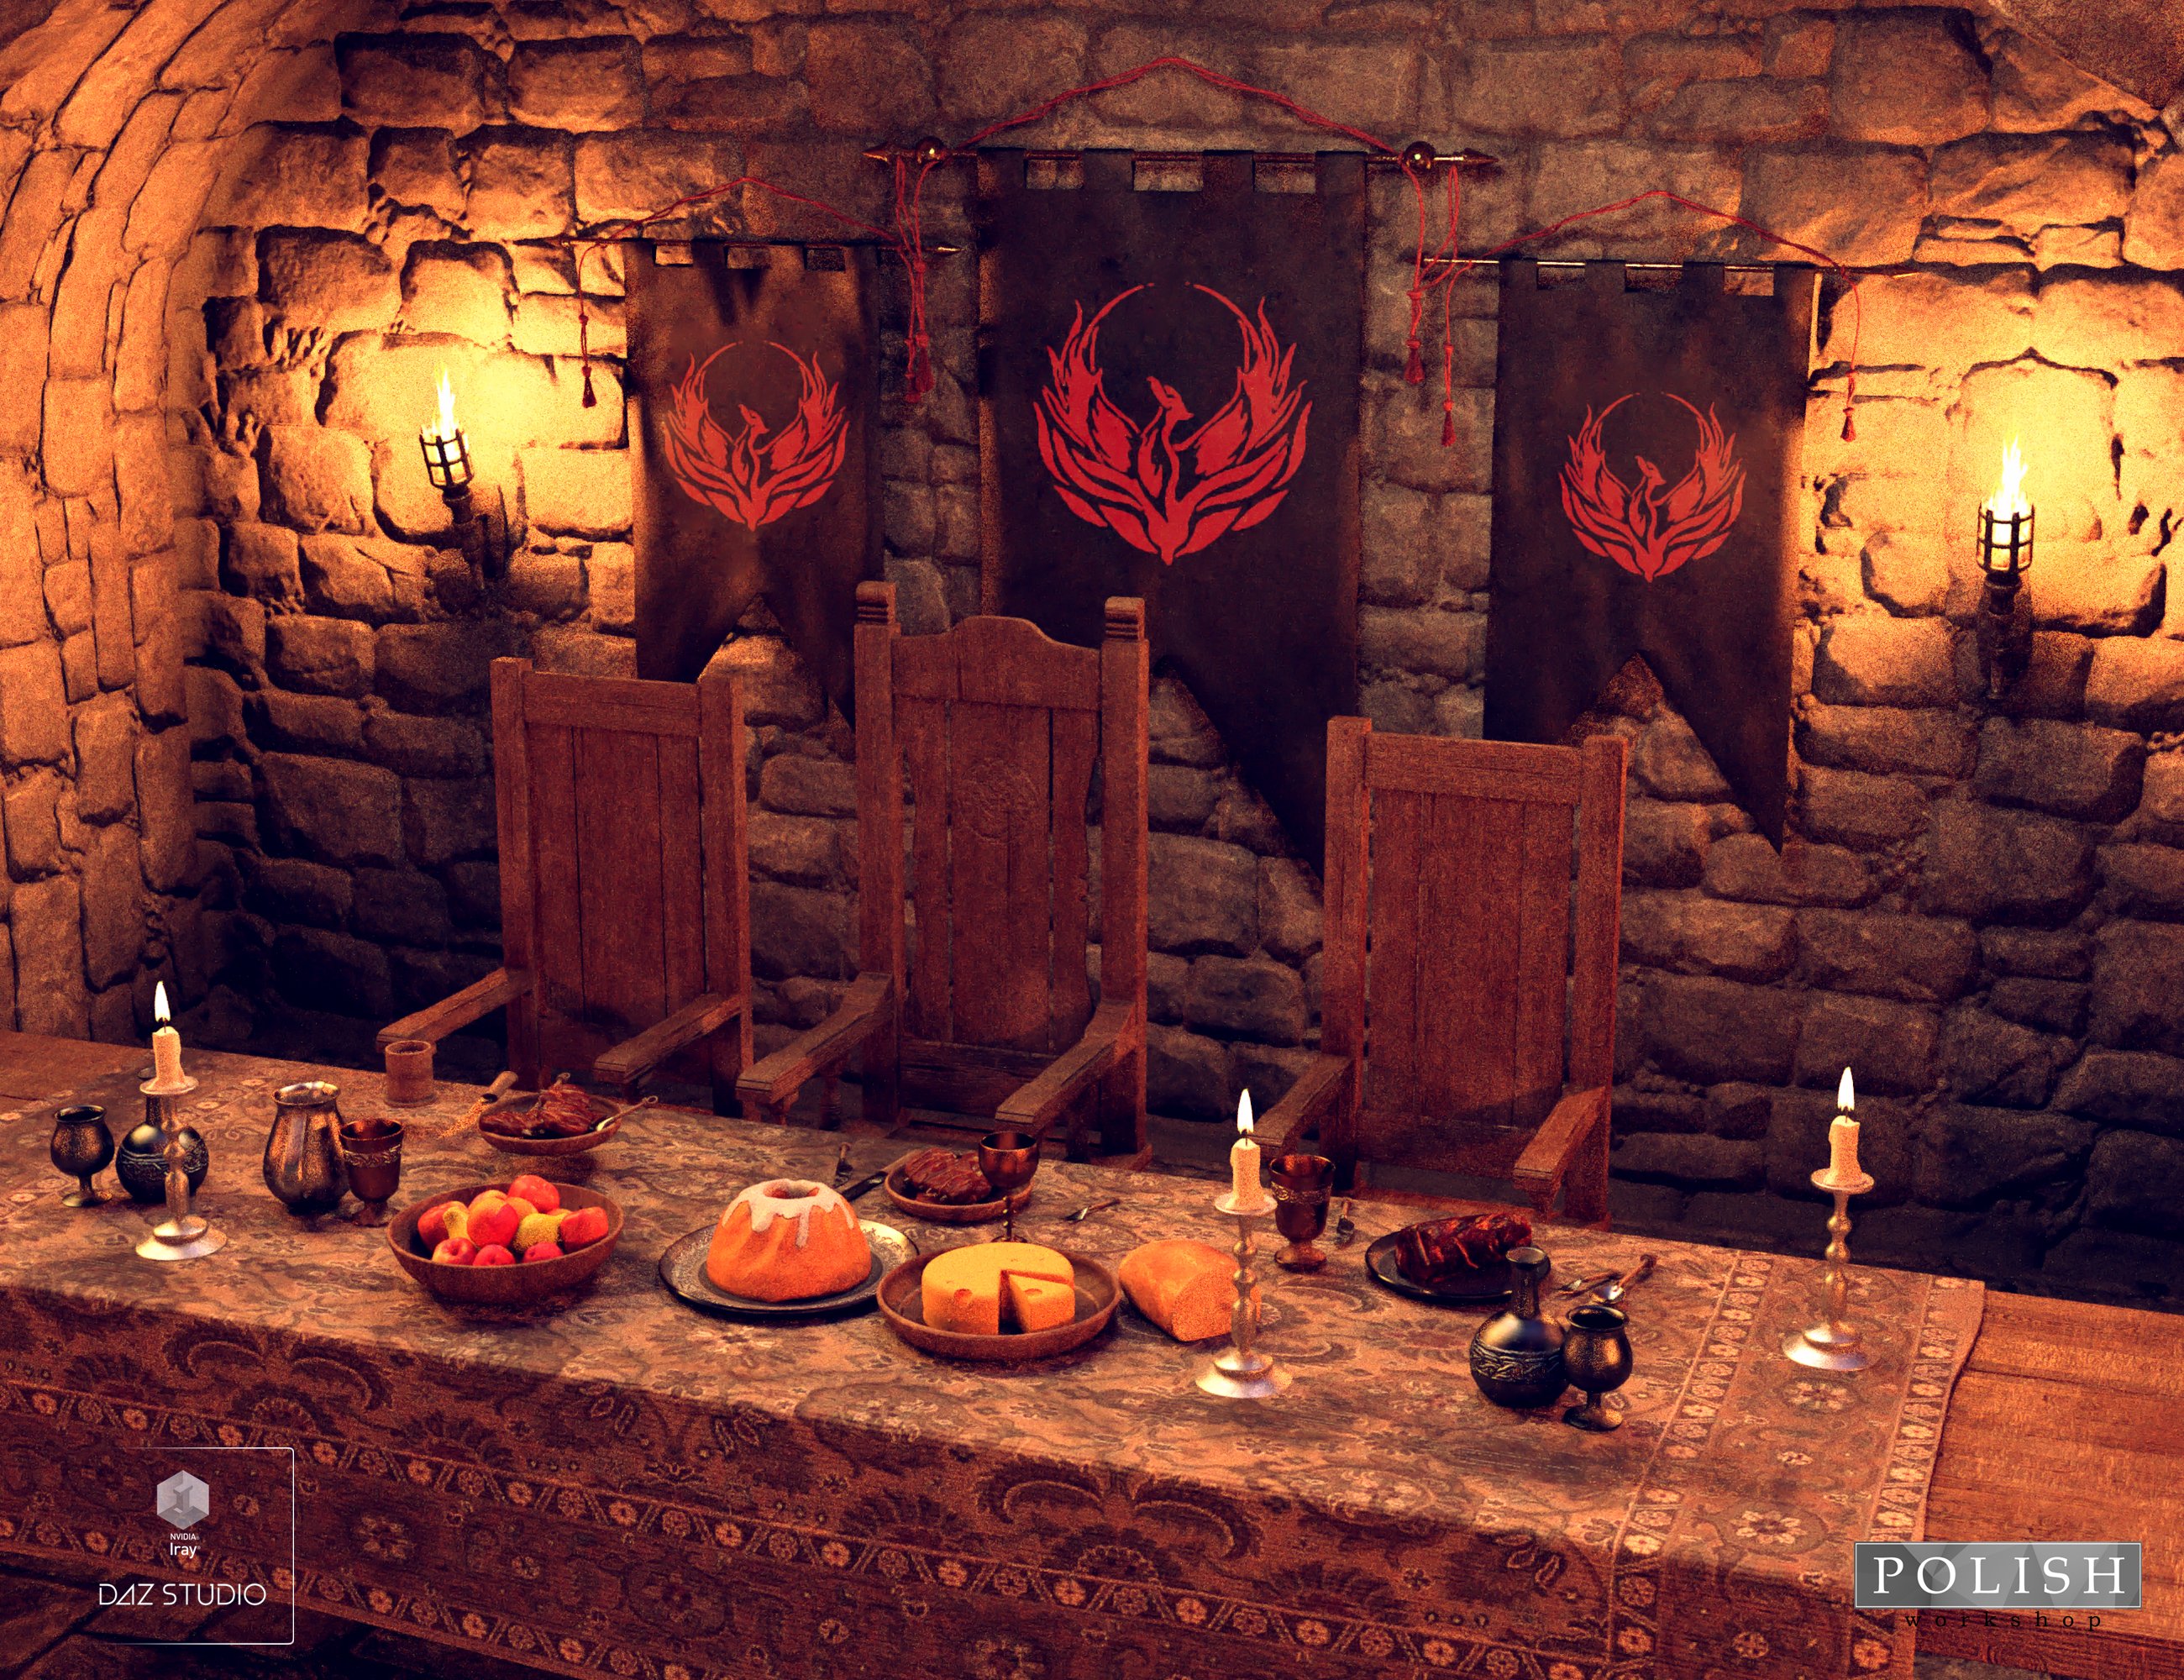 Medieval Dinner Hall Props by: Polish, 3D Models by Daz 3D